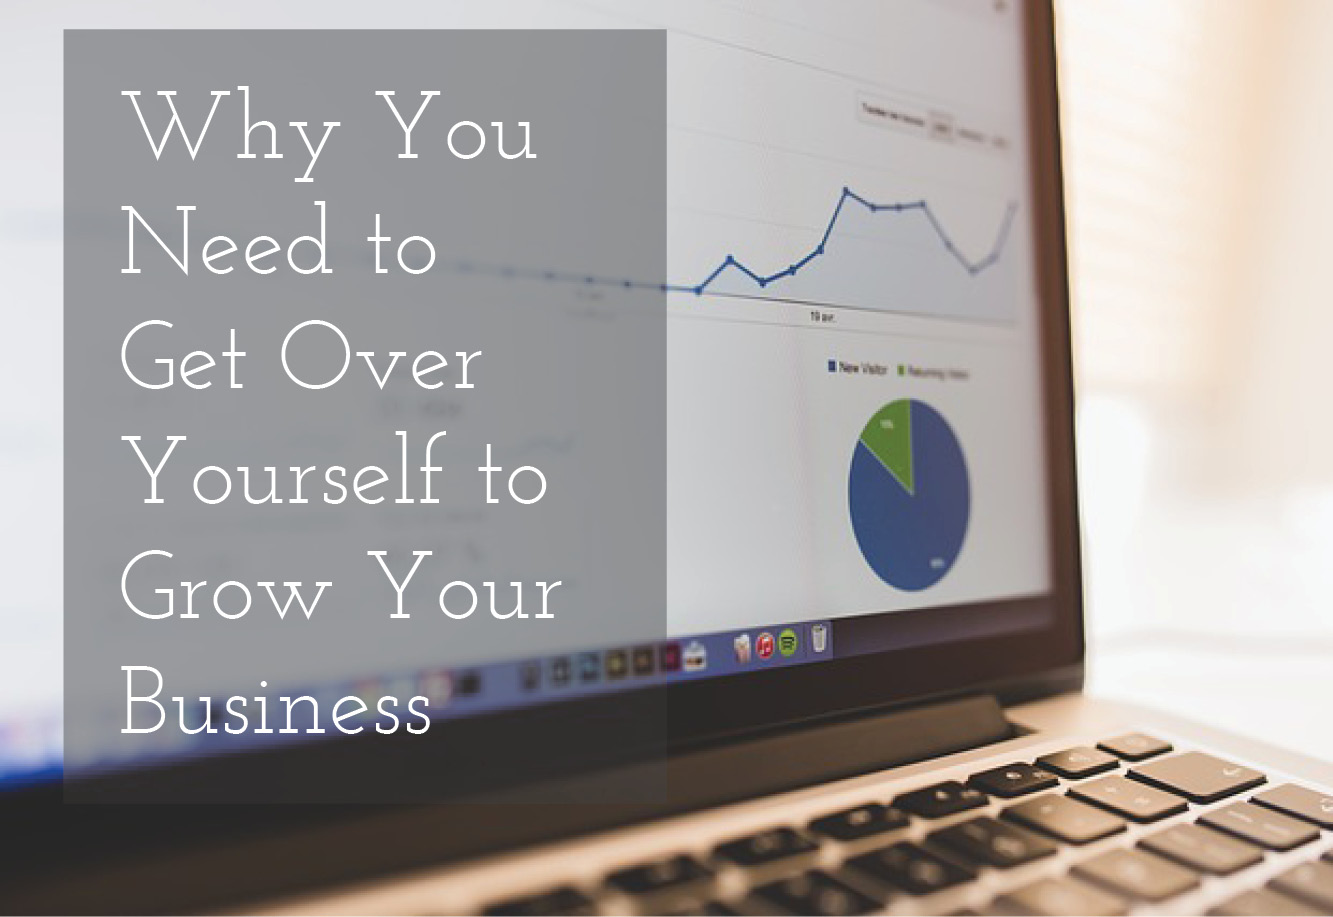 Why You Need to Get Over Yourself to Grow Your Business